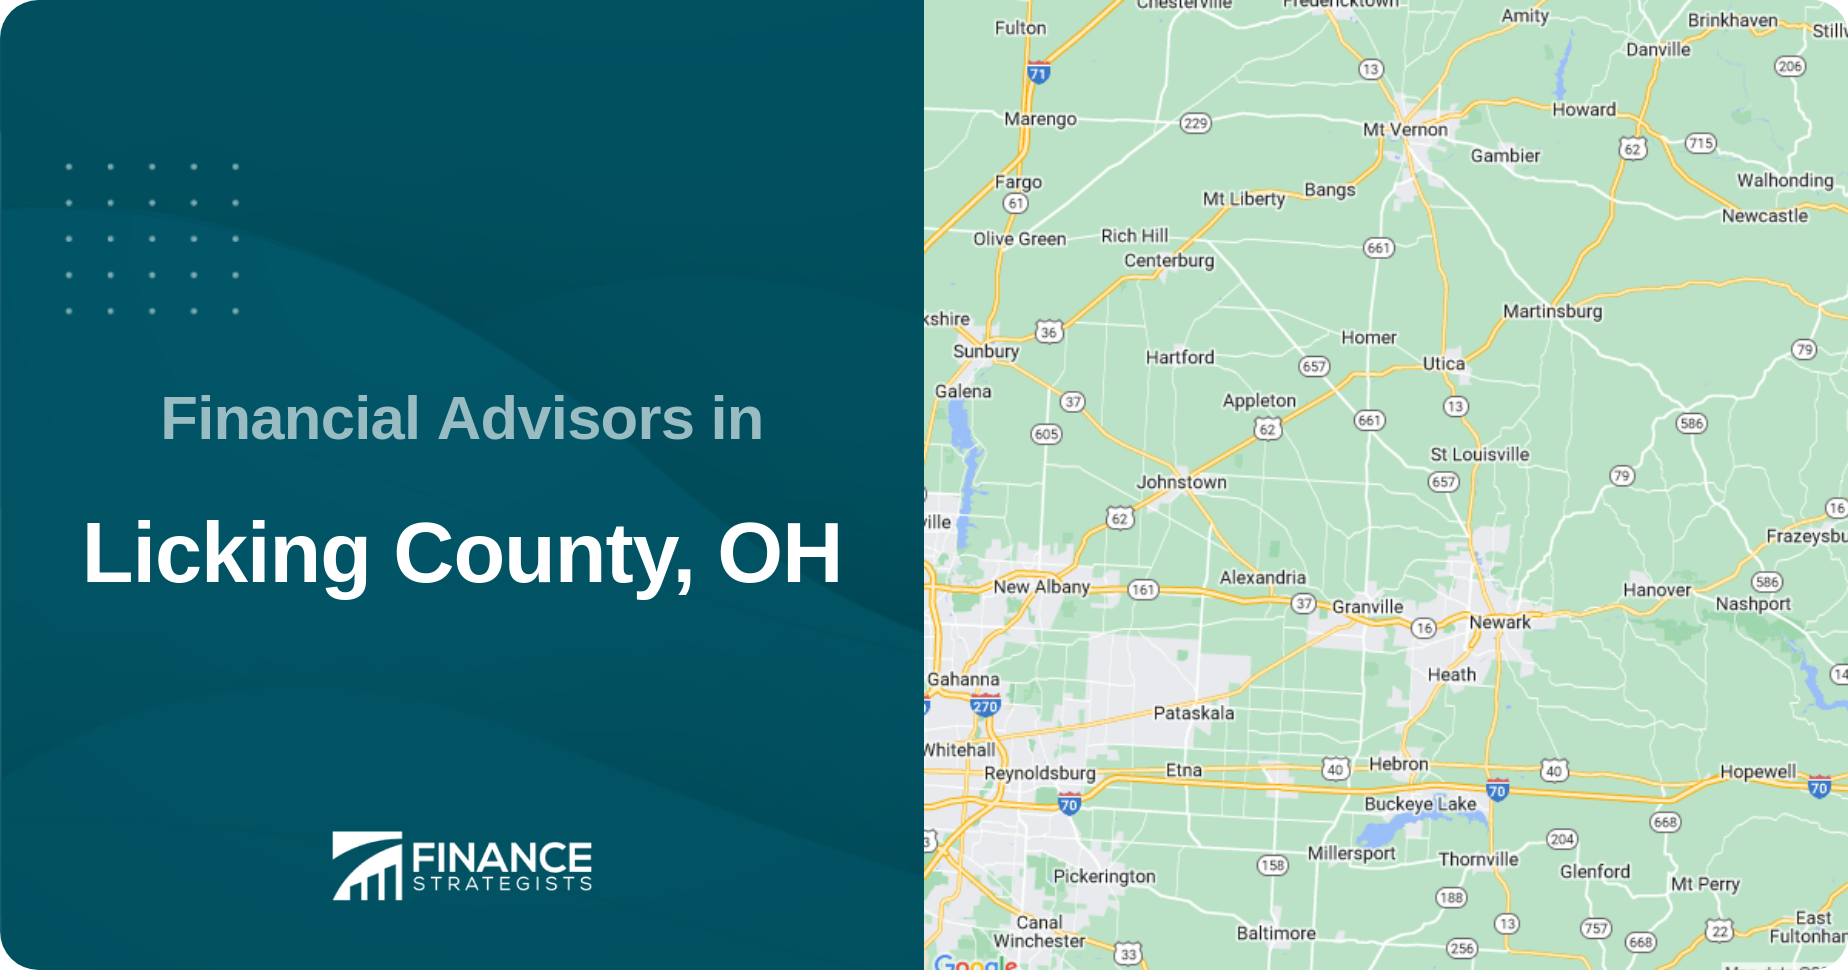 Financial Advisors in Licking County, OH